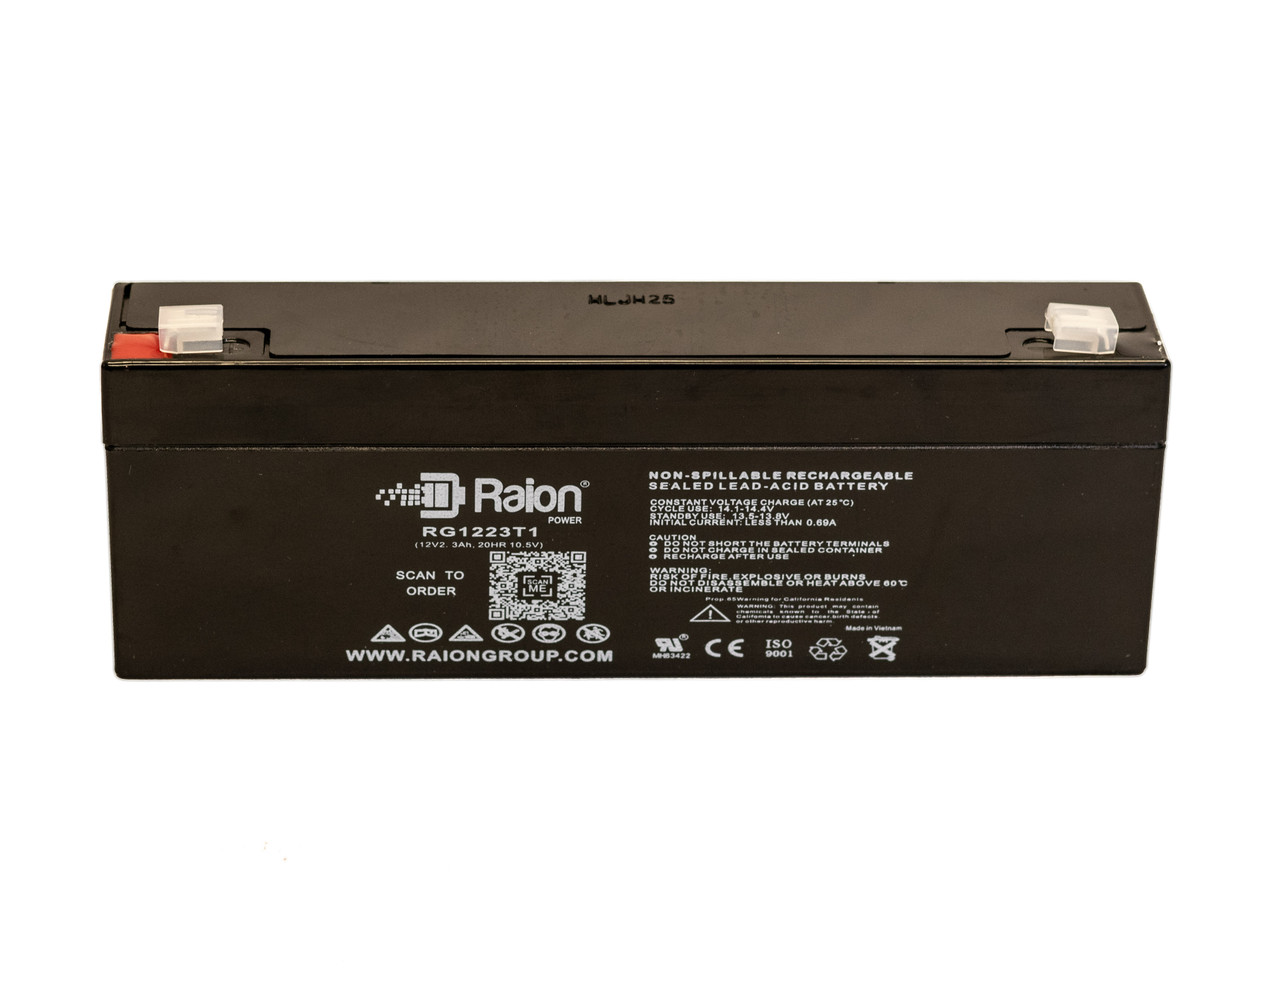 Raion Power 12V 2.3Ah SLA Battery With T1 Terminals For Baxter Healthcare AS2 Auto Syringe